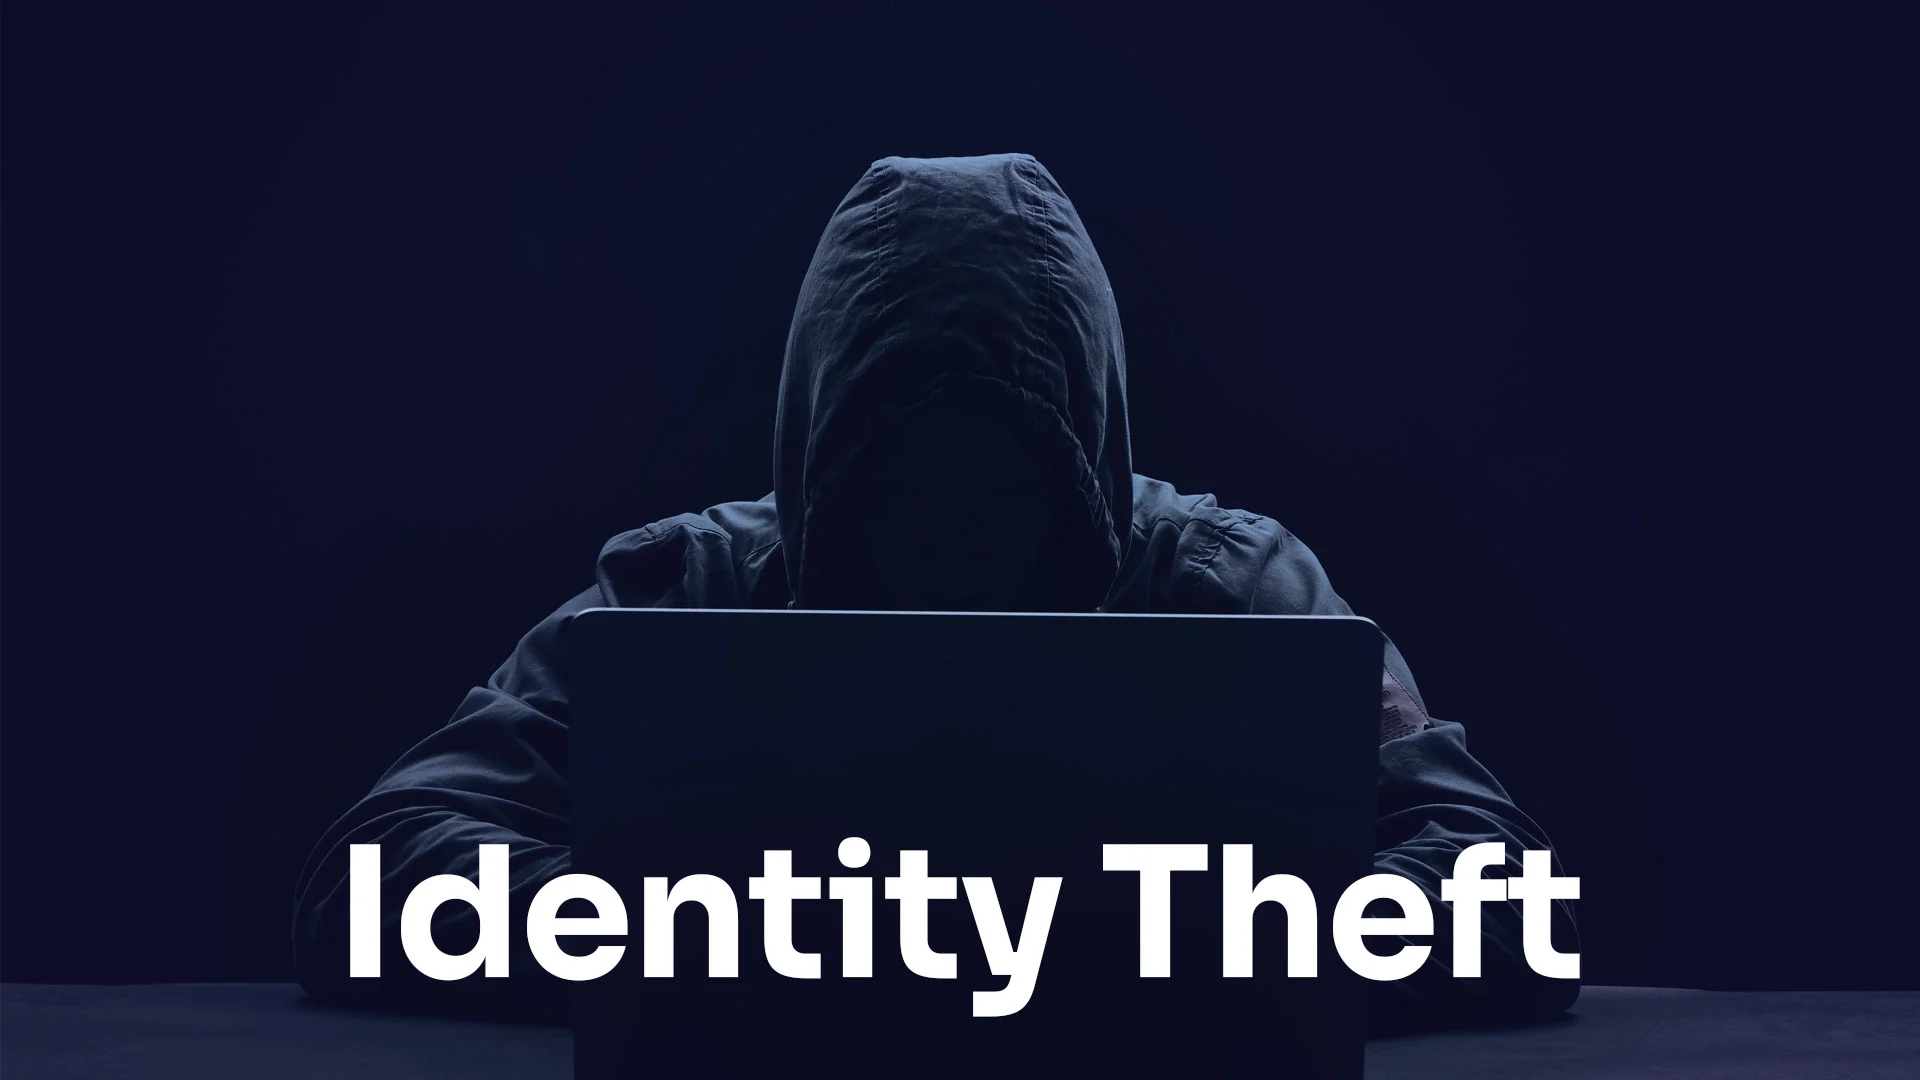 what is identity theft